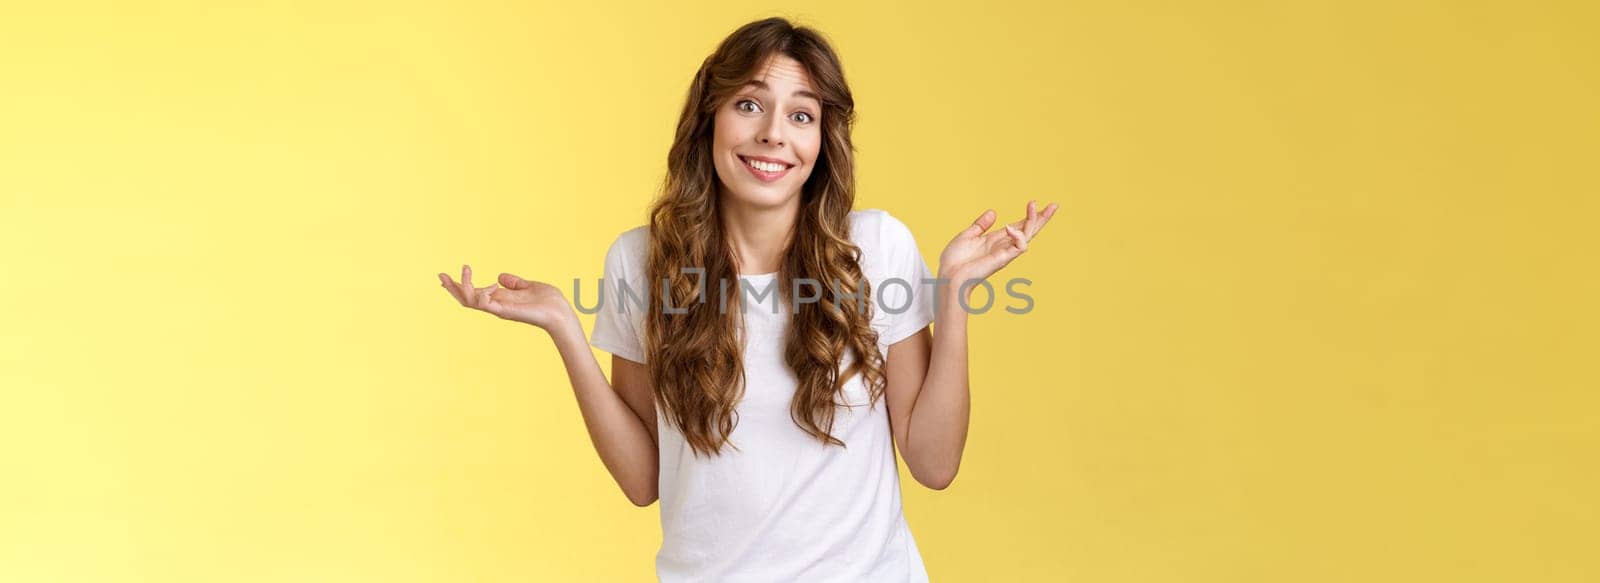 Who cares have fun. Carefree indifferent outgoing happy young woman shrugs raise hands sideways clueless unbothered apathic to topic uninterested smiling broadly careless yellow background.